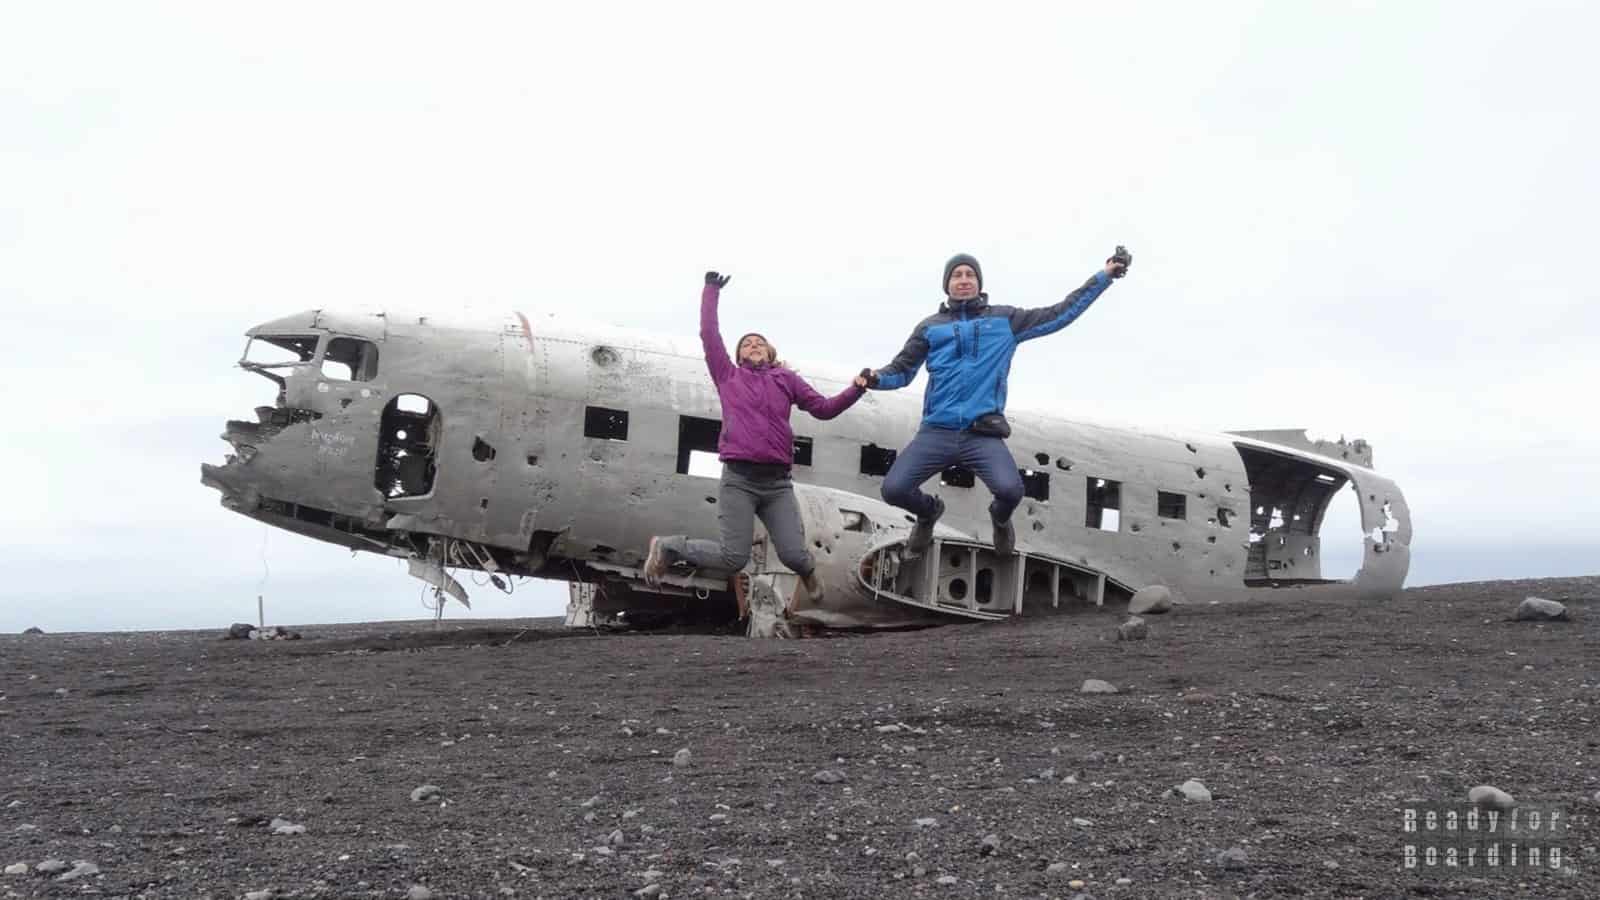 Wreckage of an American airliner - Iceland